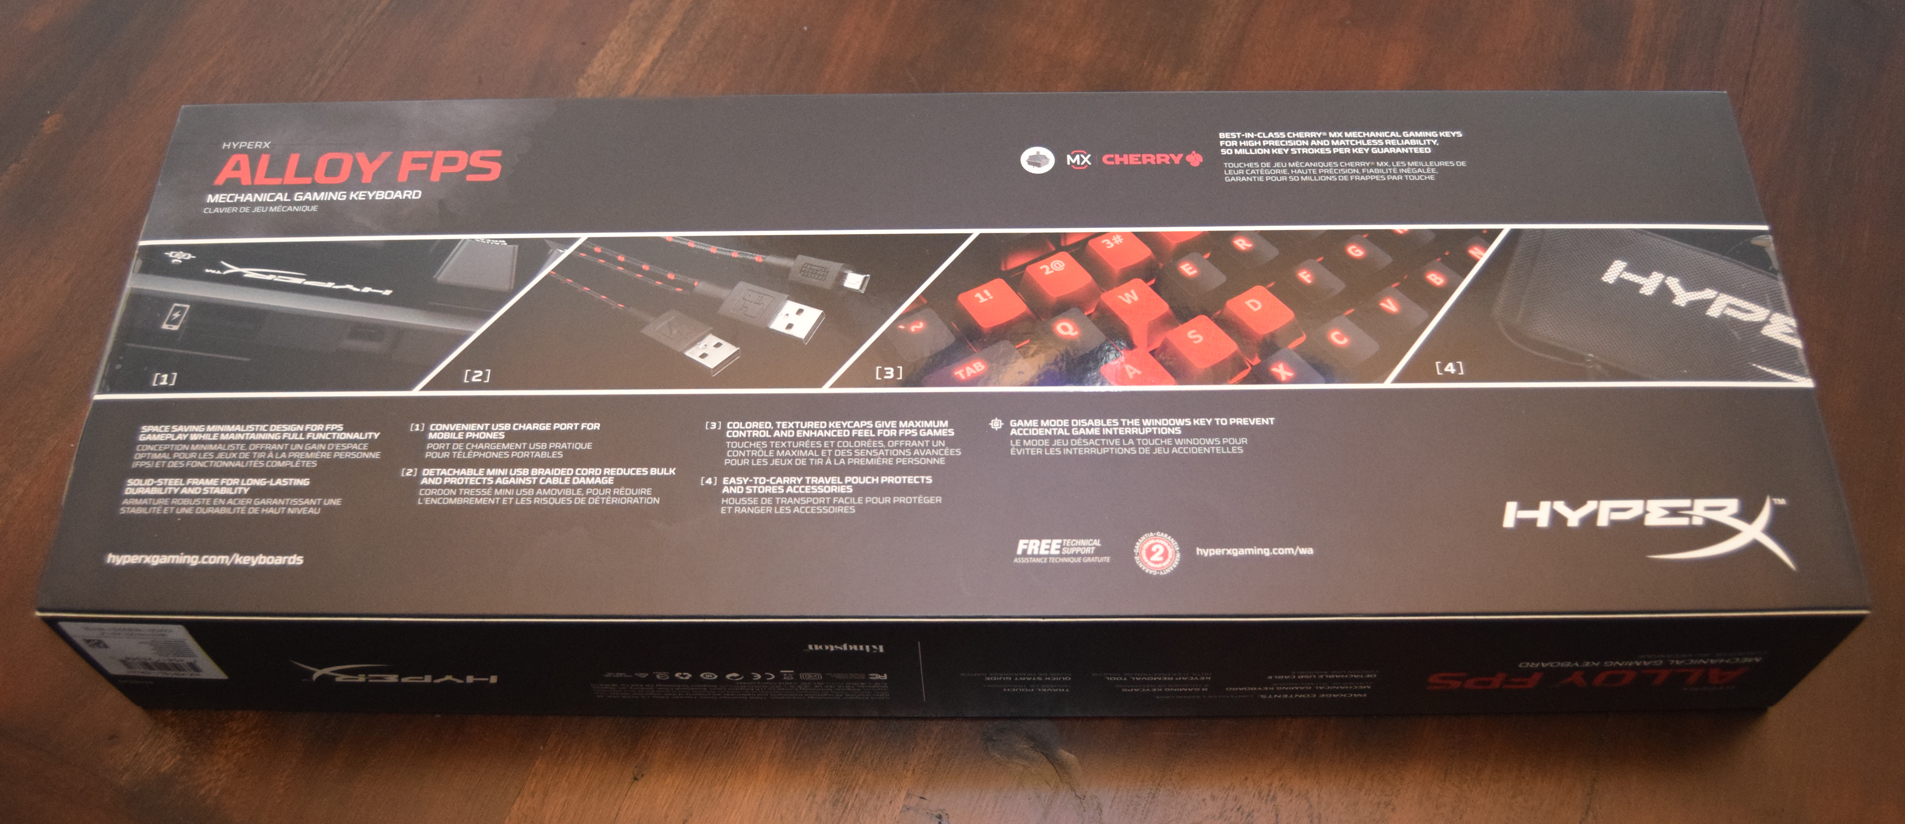 HyperX Alloy FPS Mechanical Gaming Keyboard review box back